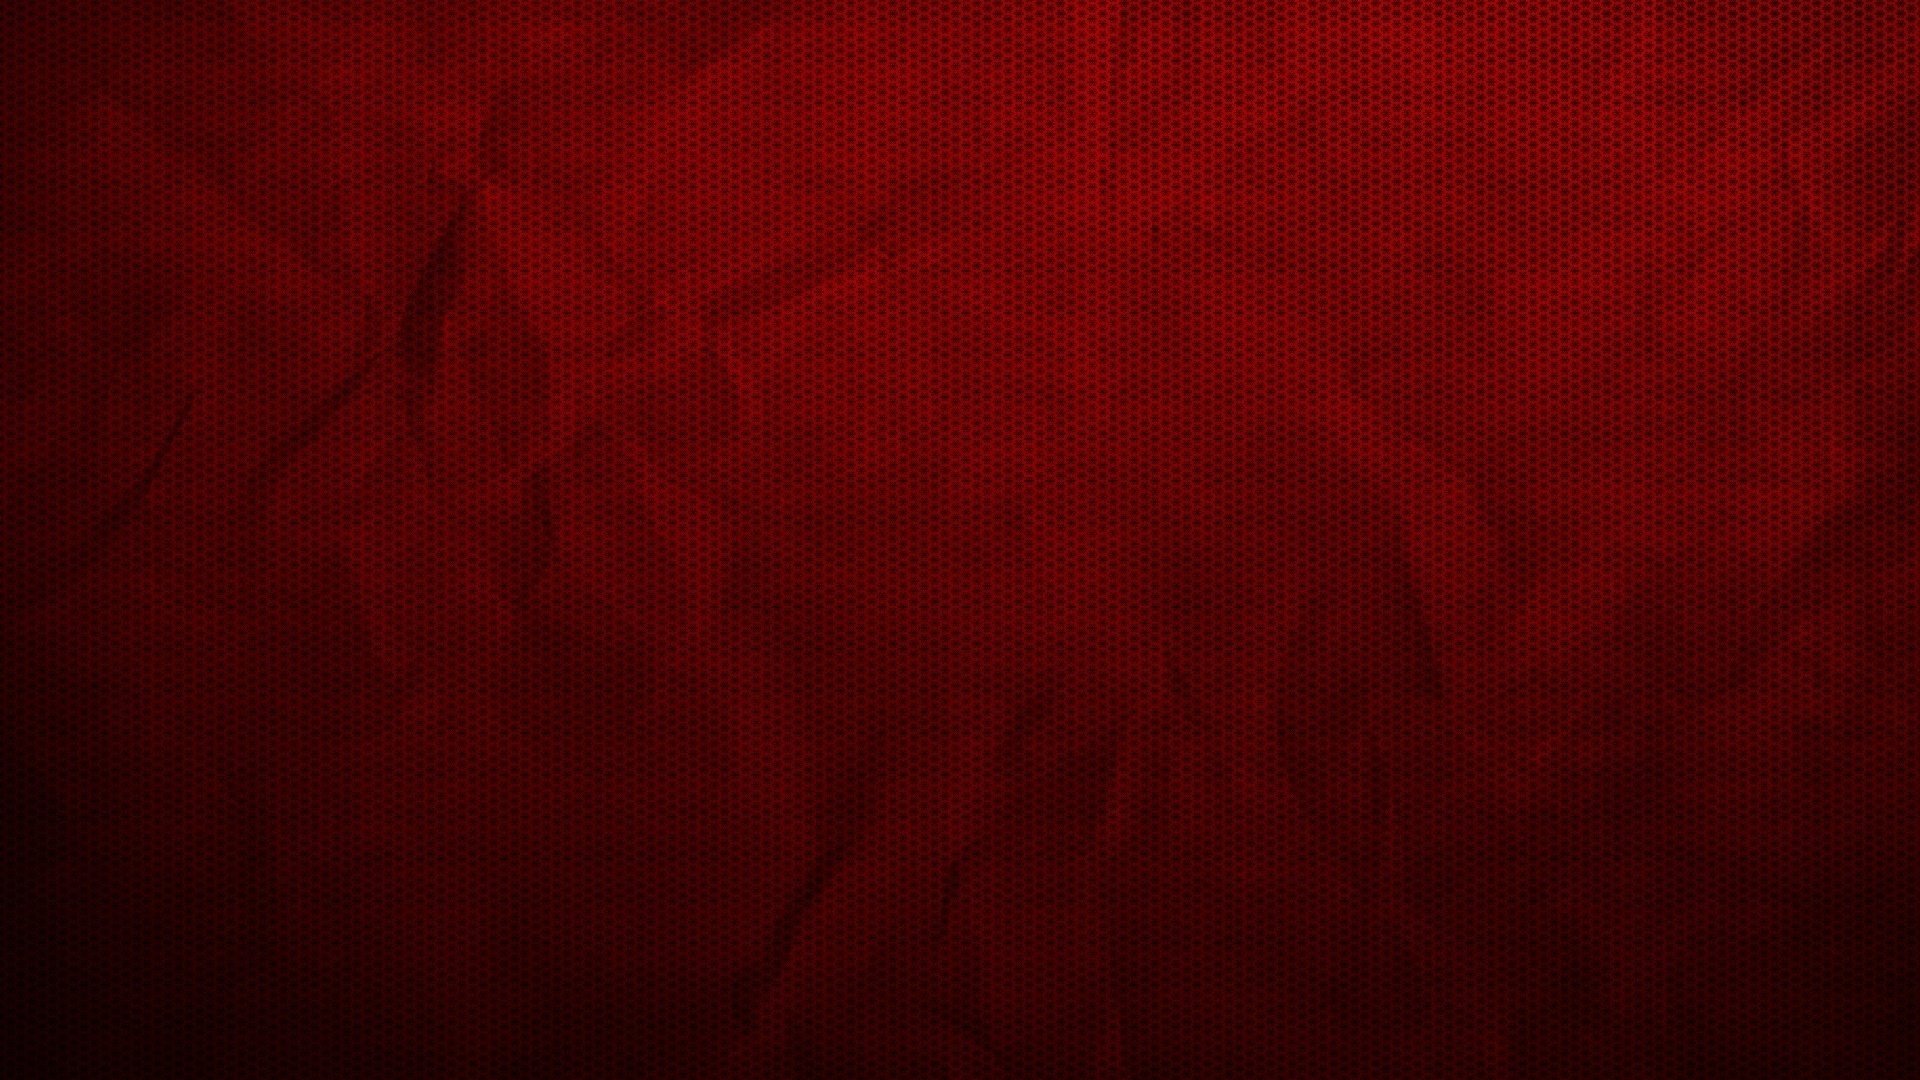 Maroon Wallpaper Picture hd